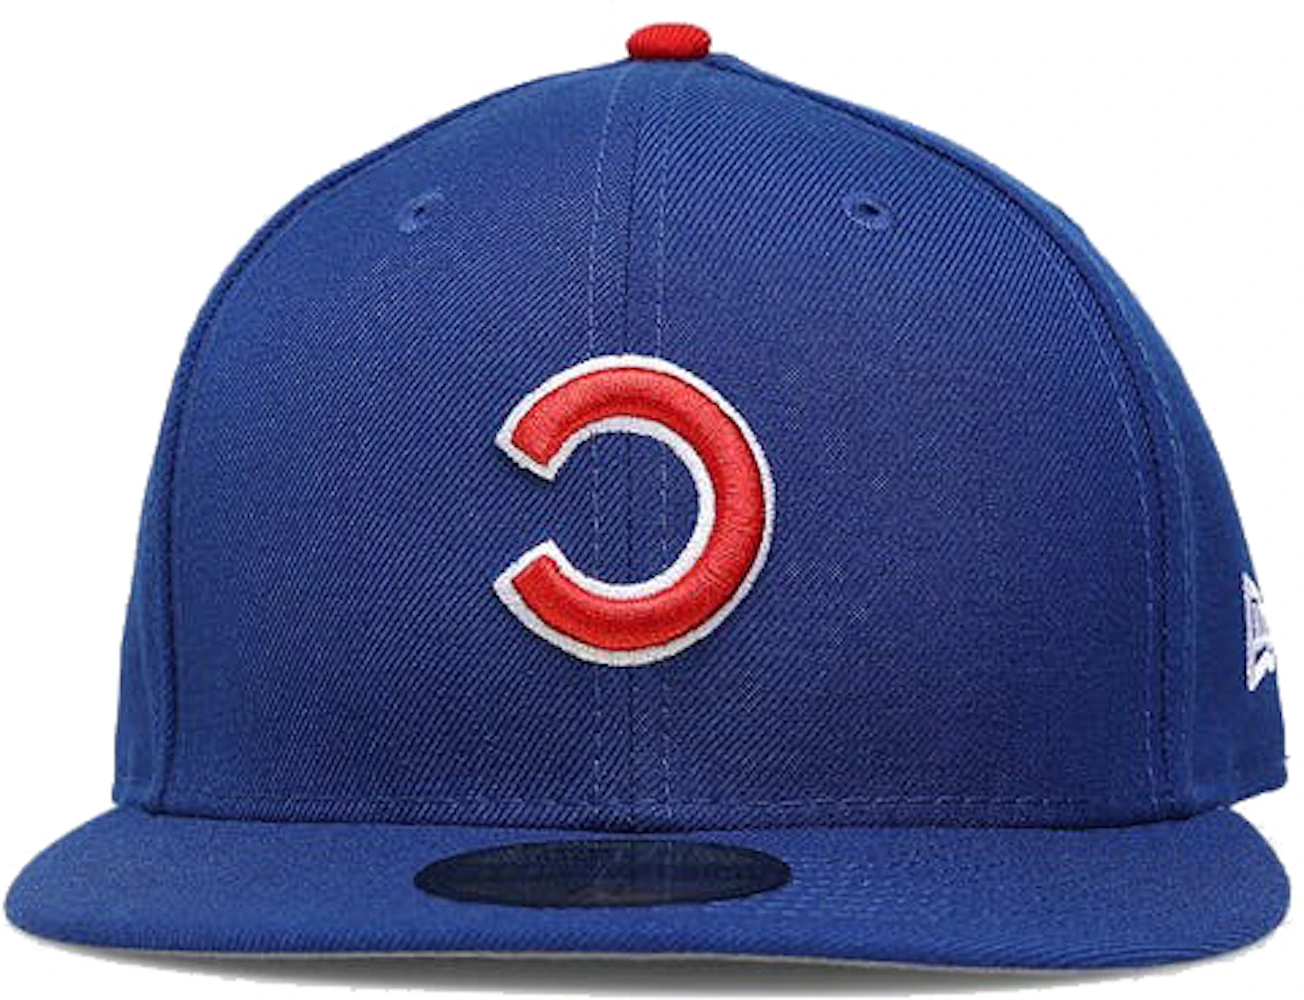 New Era MLB Chicago Cubs 59Fifty Cap - Blue - Size: 7 1/4